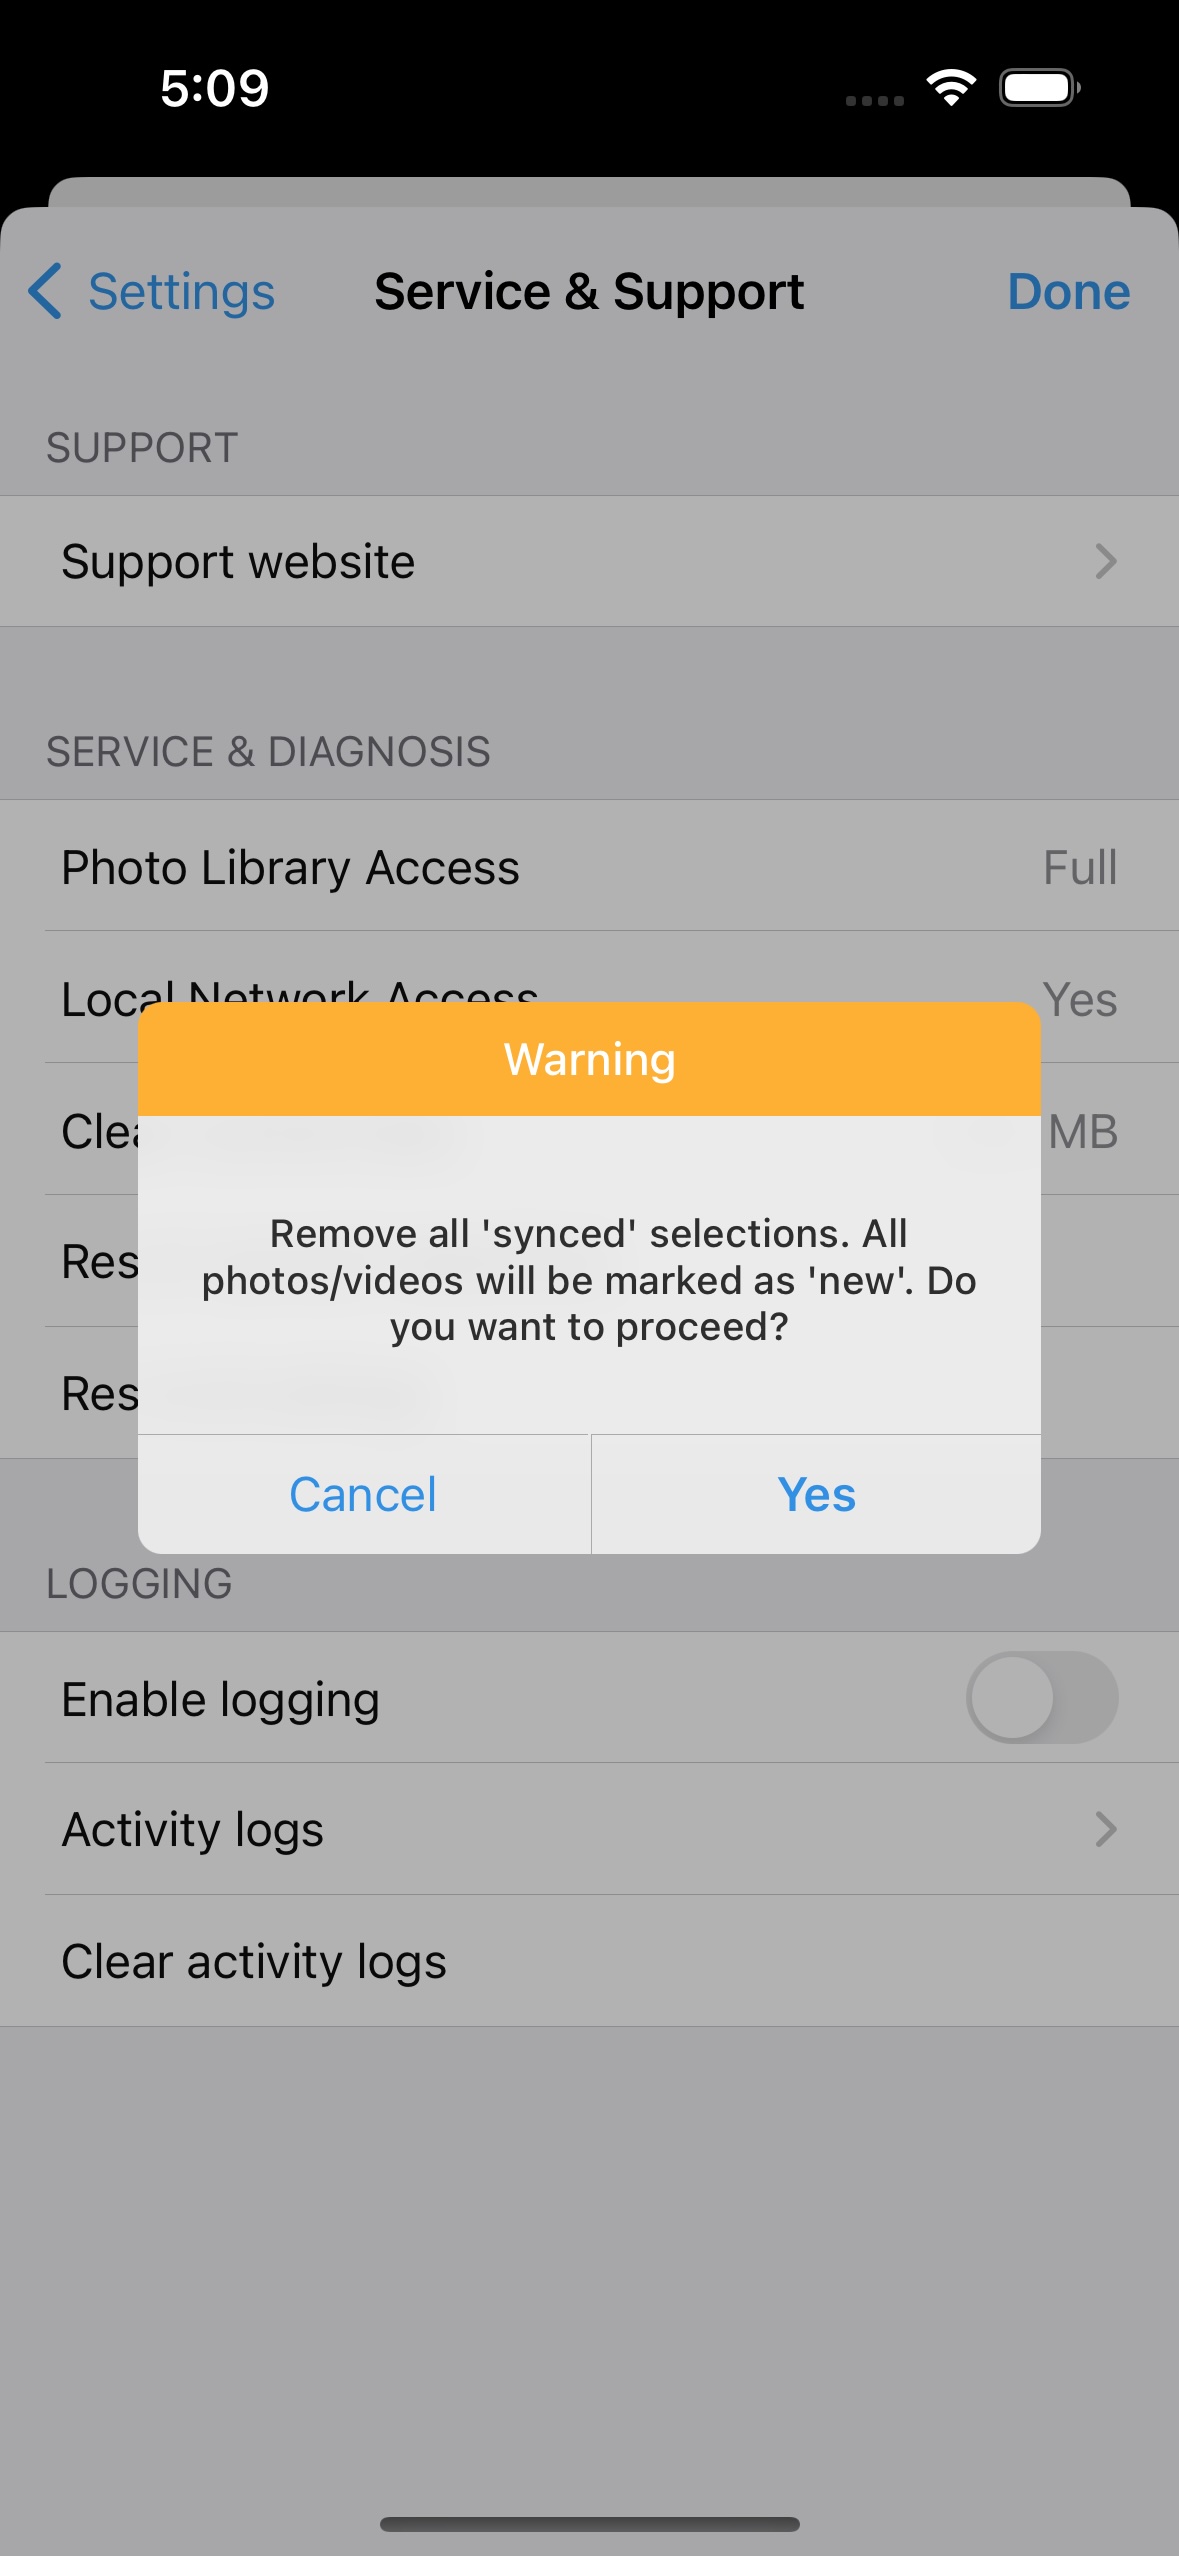 Confirm to reset the 'synced' selections